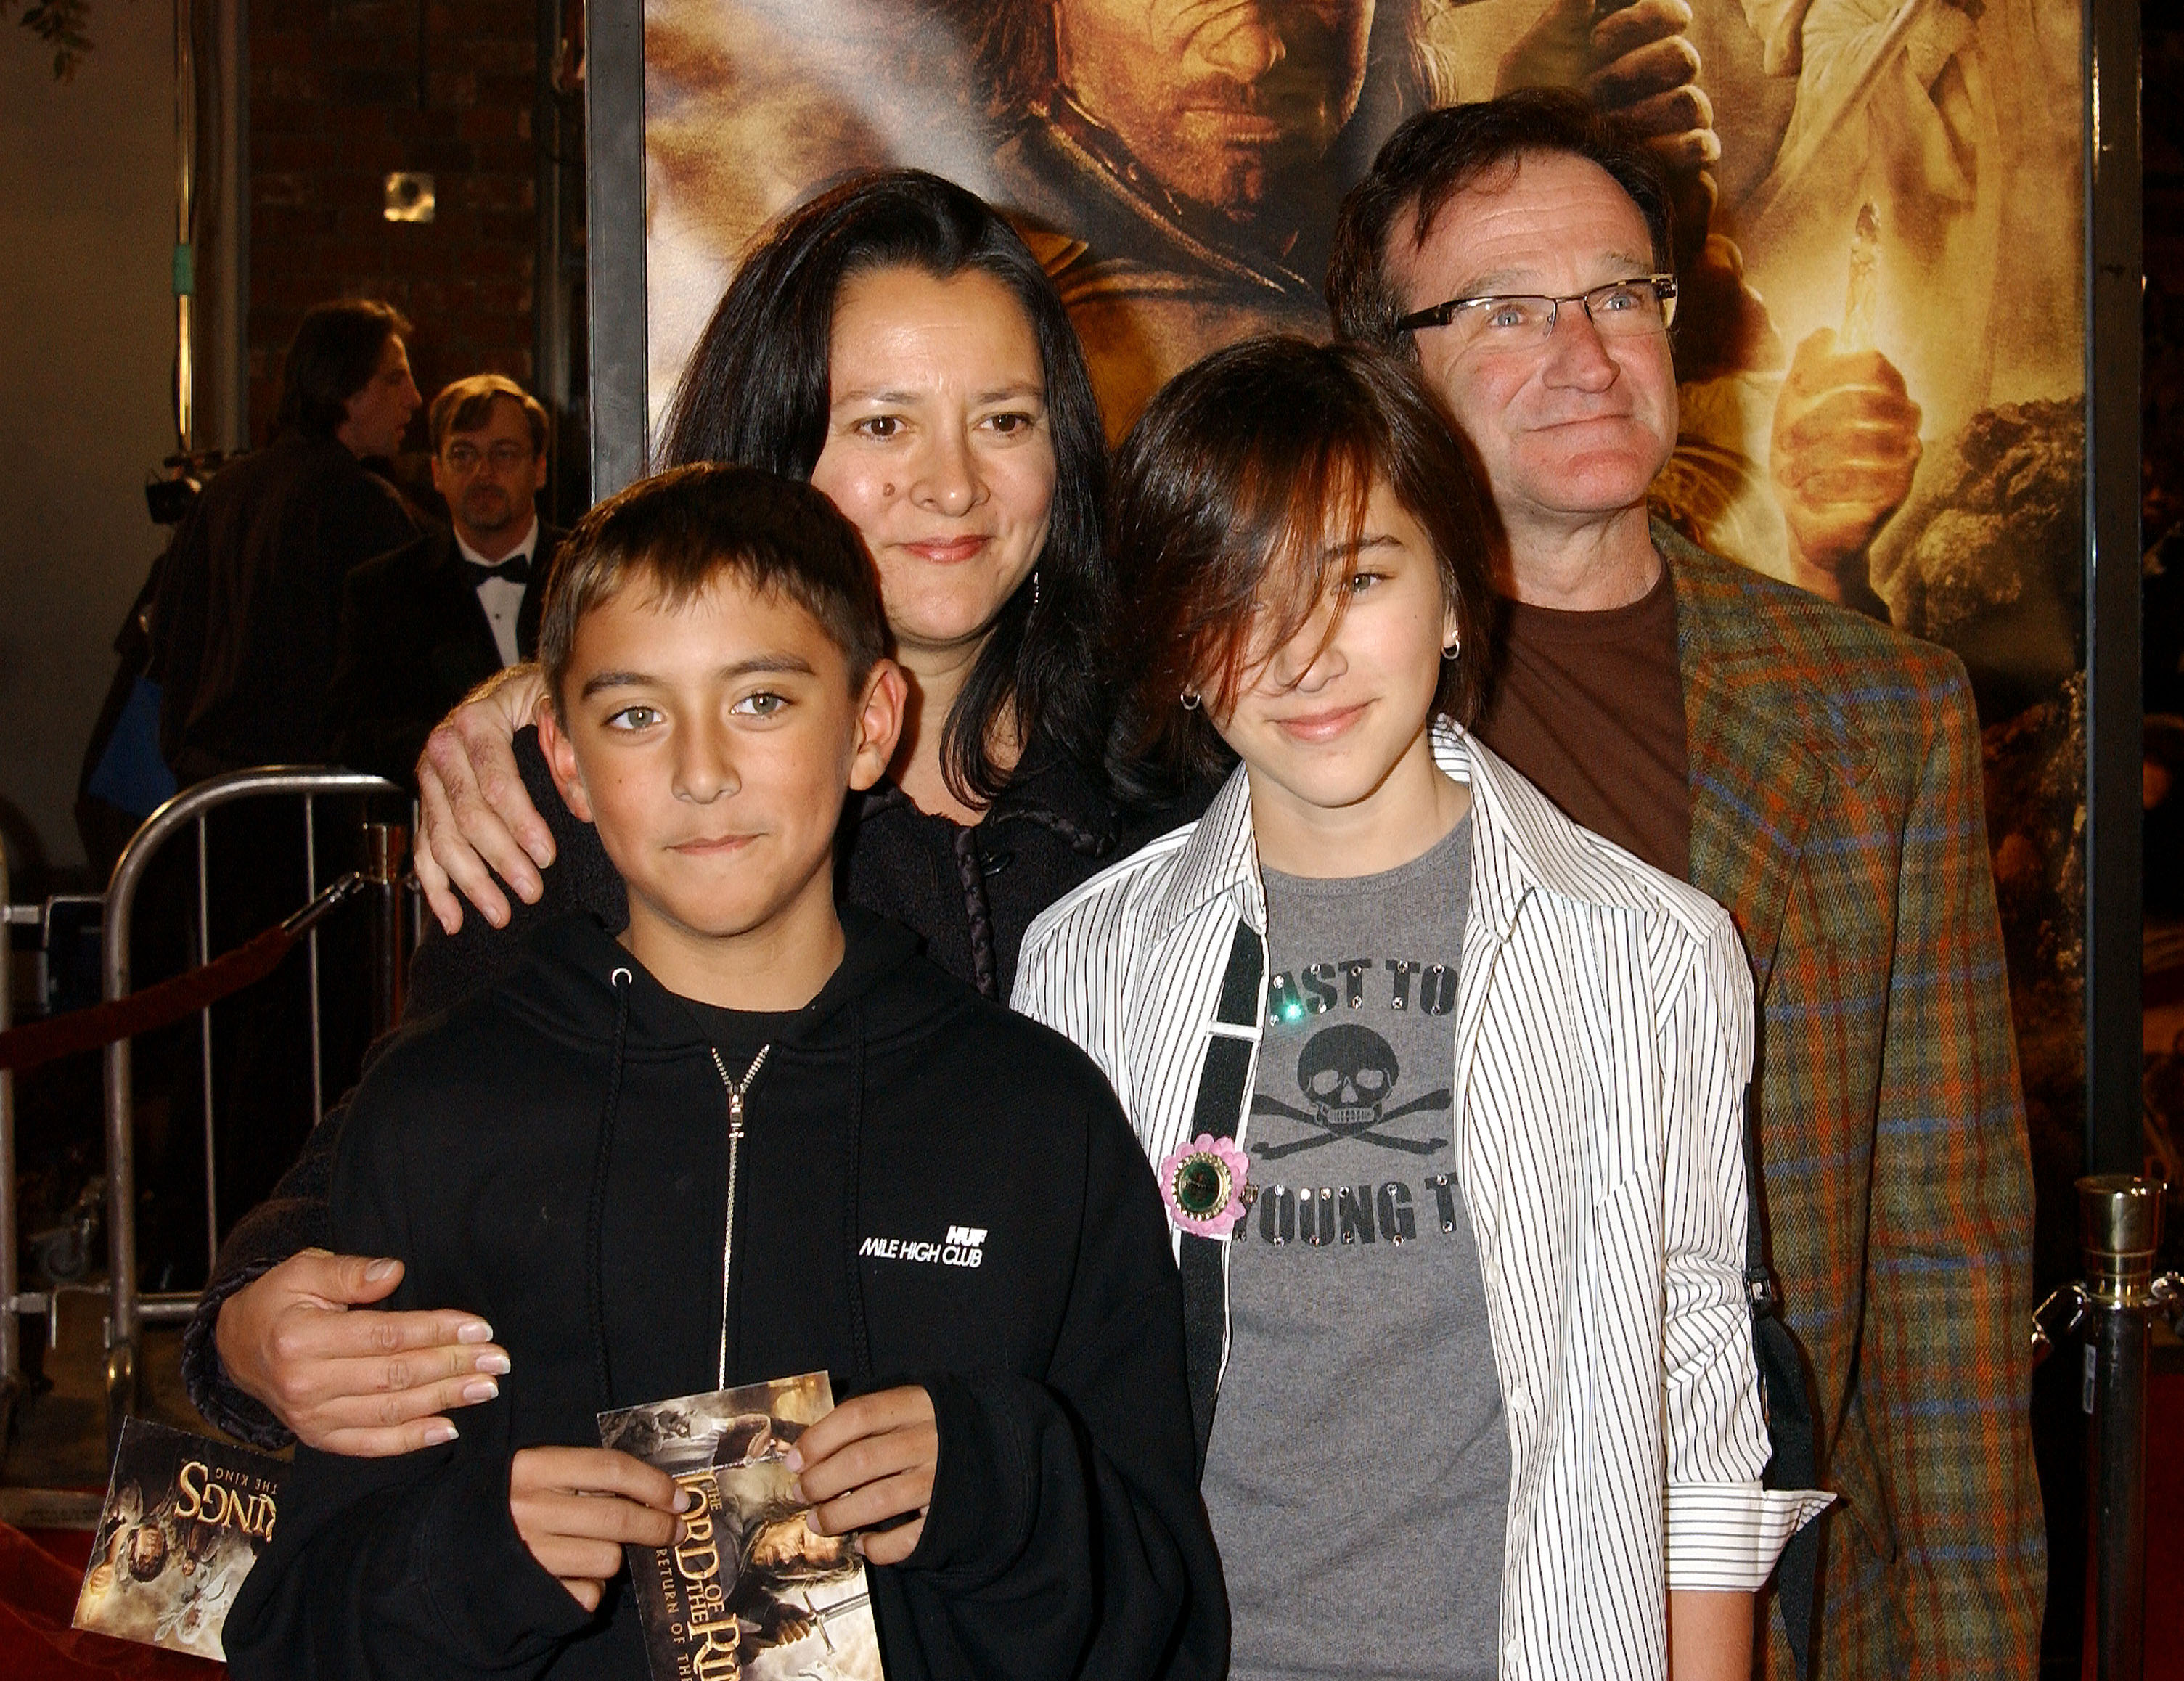 Robin Williams and family during "The Lord Of The Rings:The Return Of The King" Los Angeles Premiere at Mann Village Theatre in Westwood, California, United States | Source: Getty Images